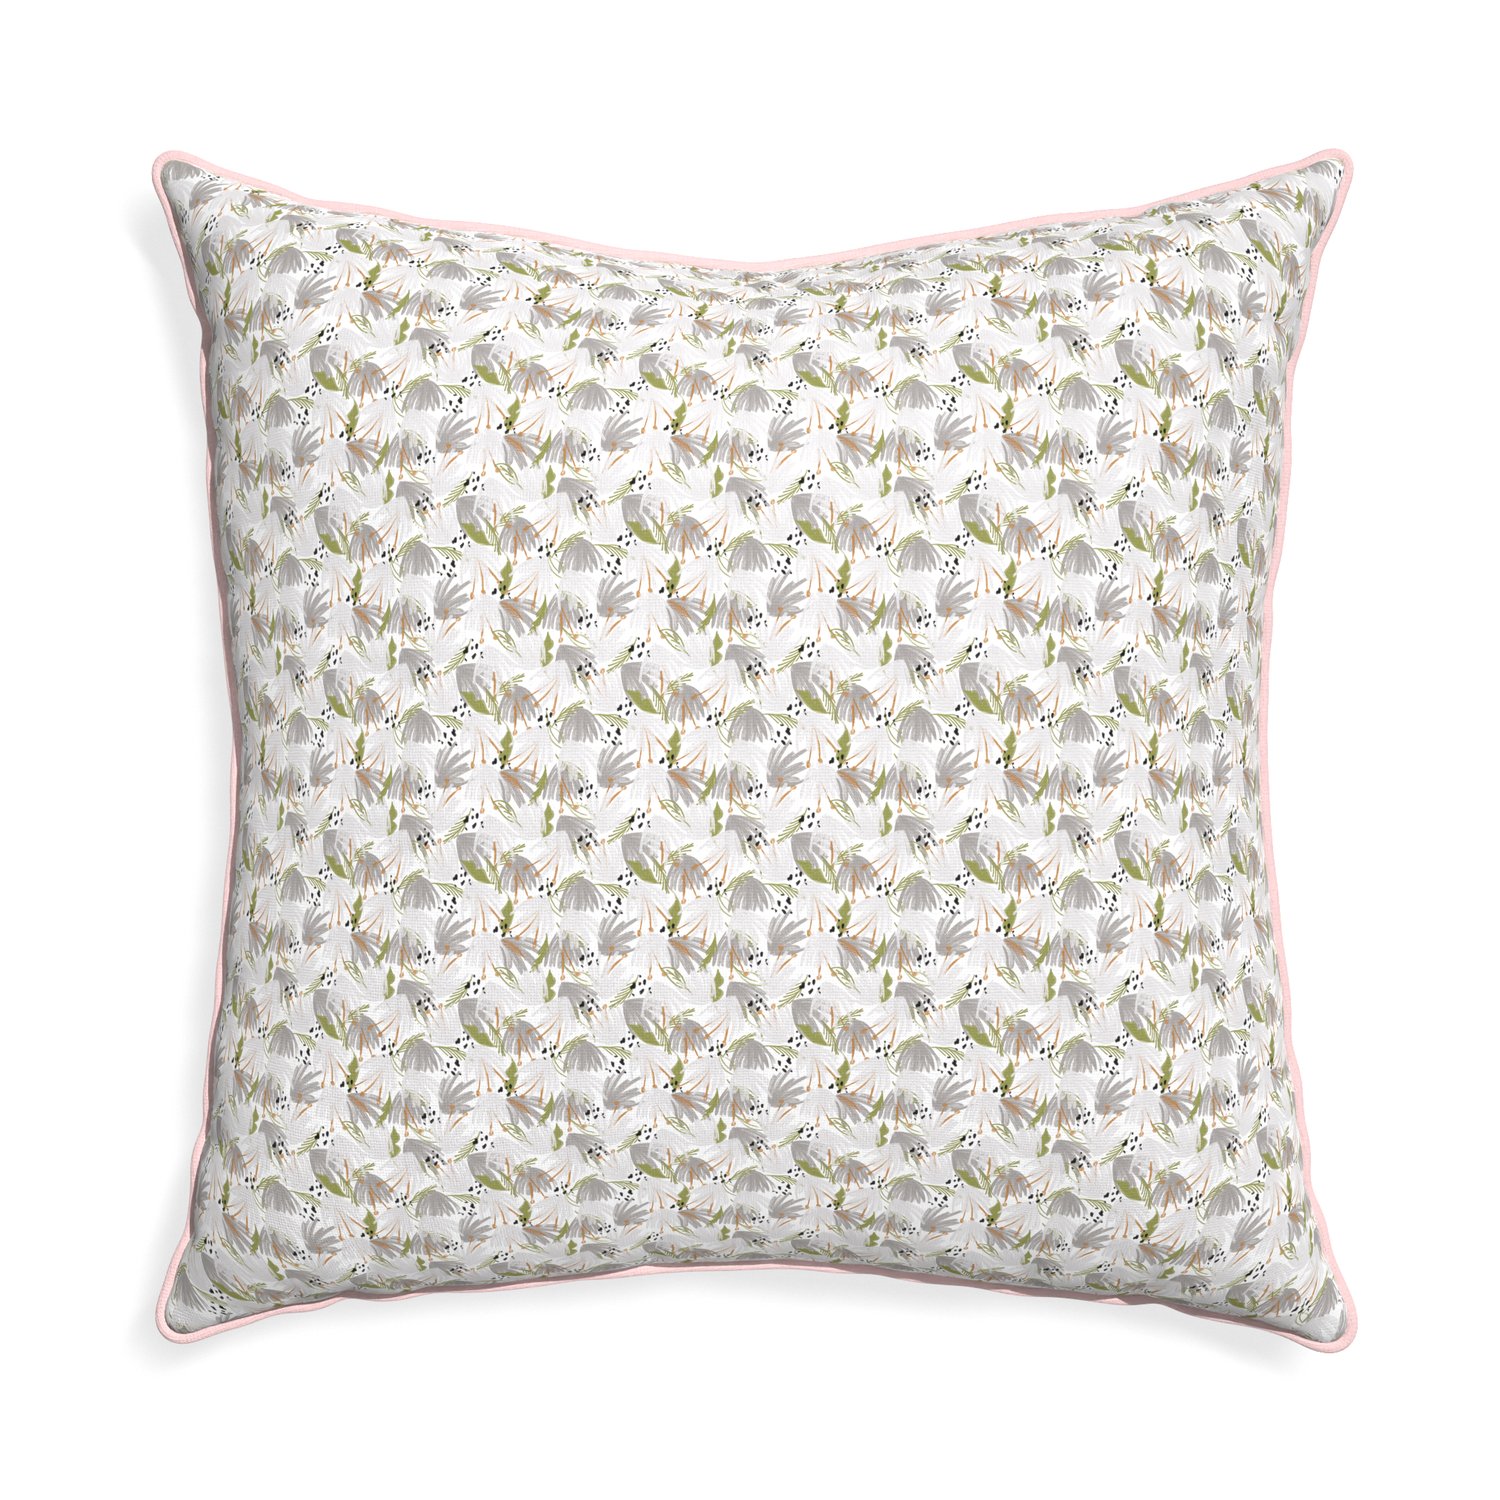 Euro-sham eden grey custom grey floralpillow with petal piping on white background